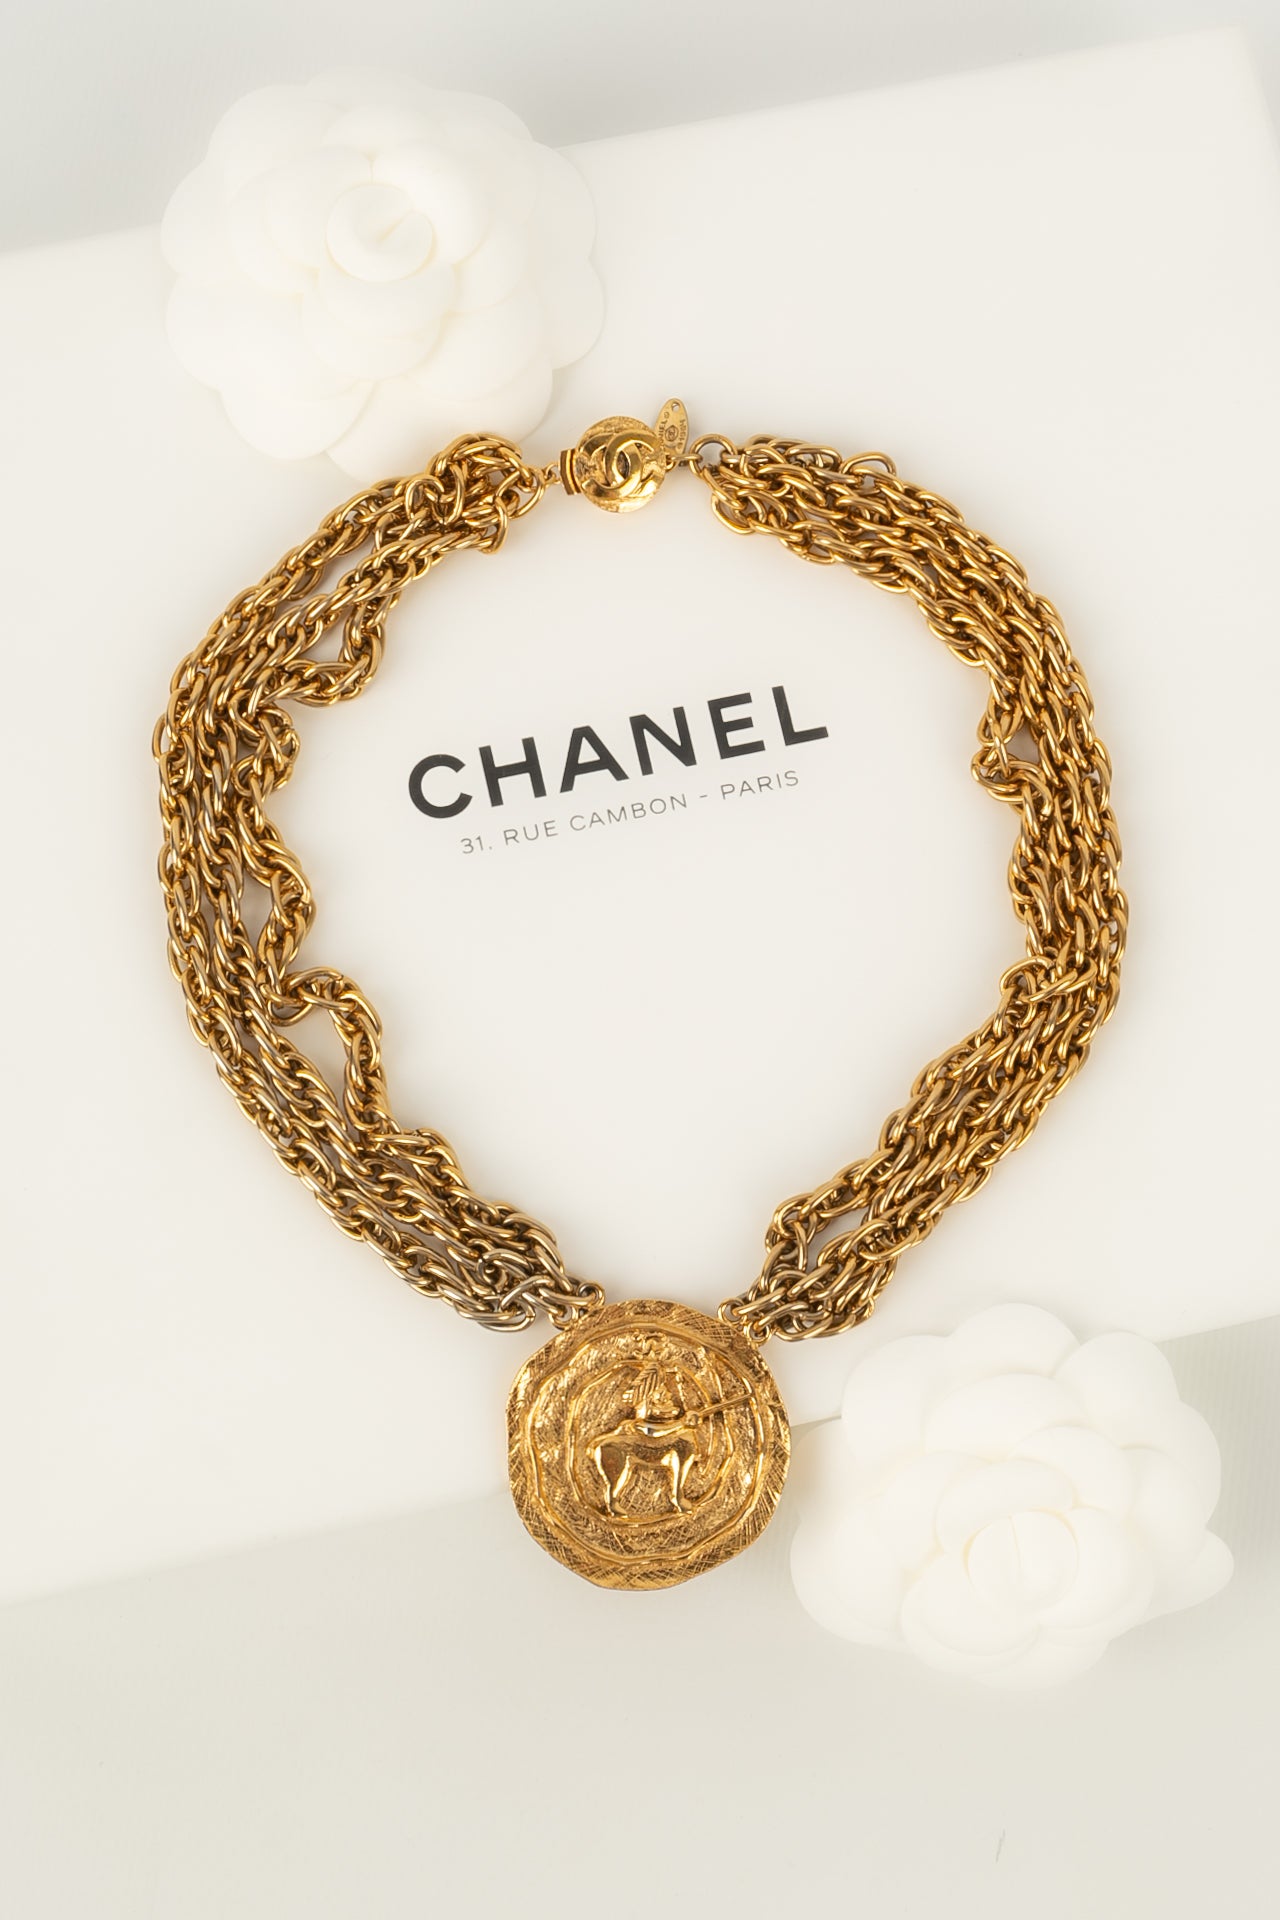 Chanel necklace 1984